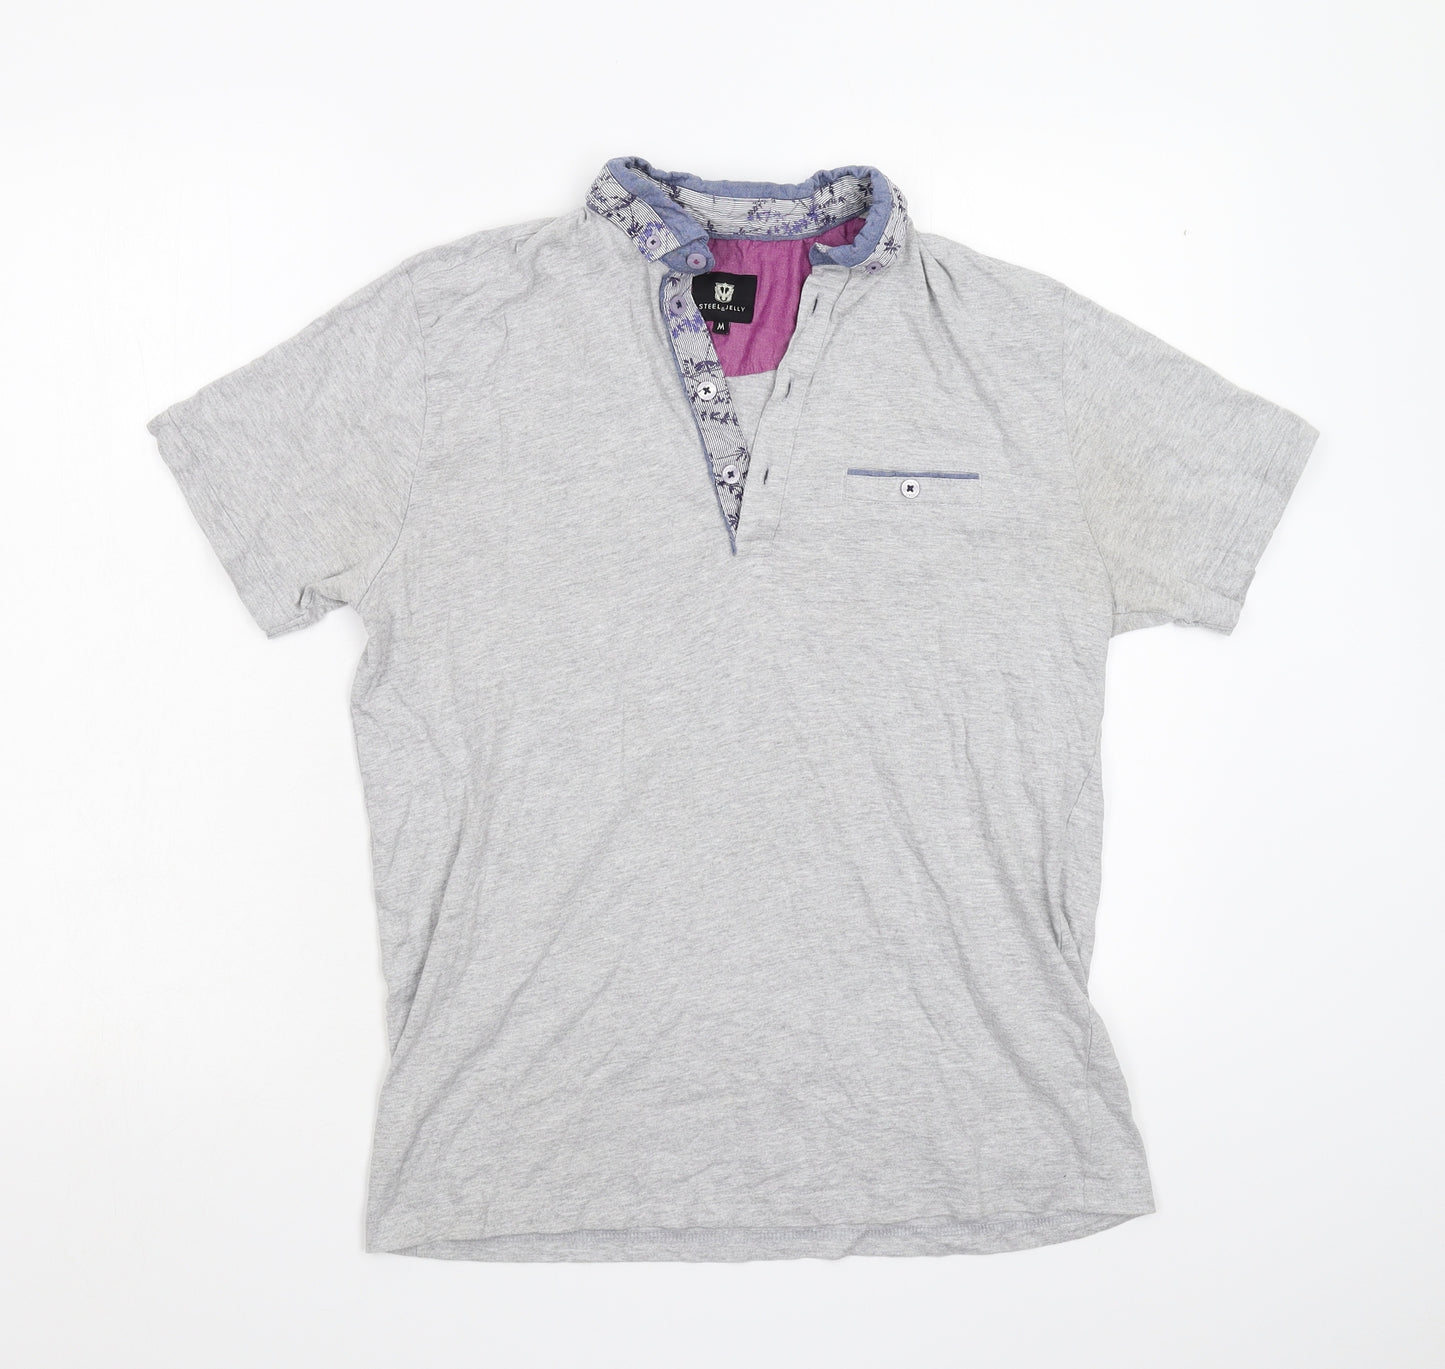 Steel & Jelly Mens Grey    Polo Size M